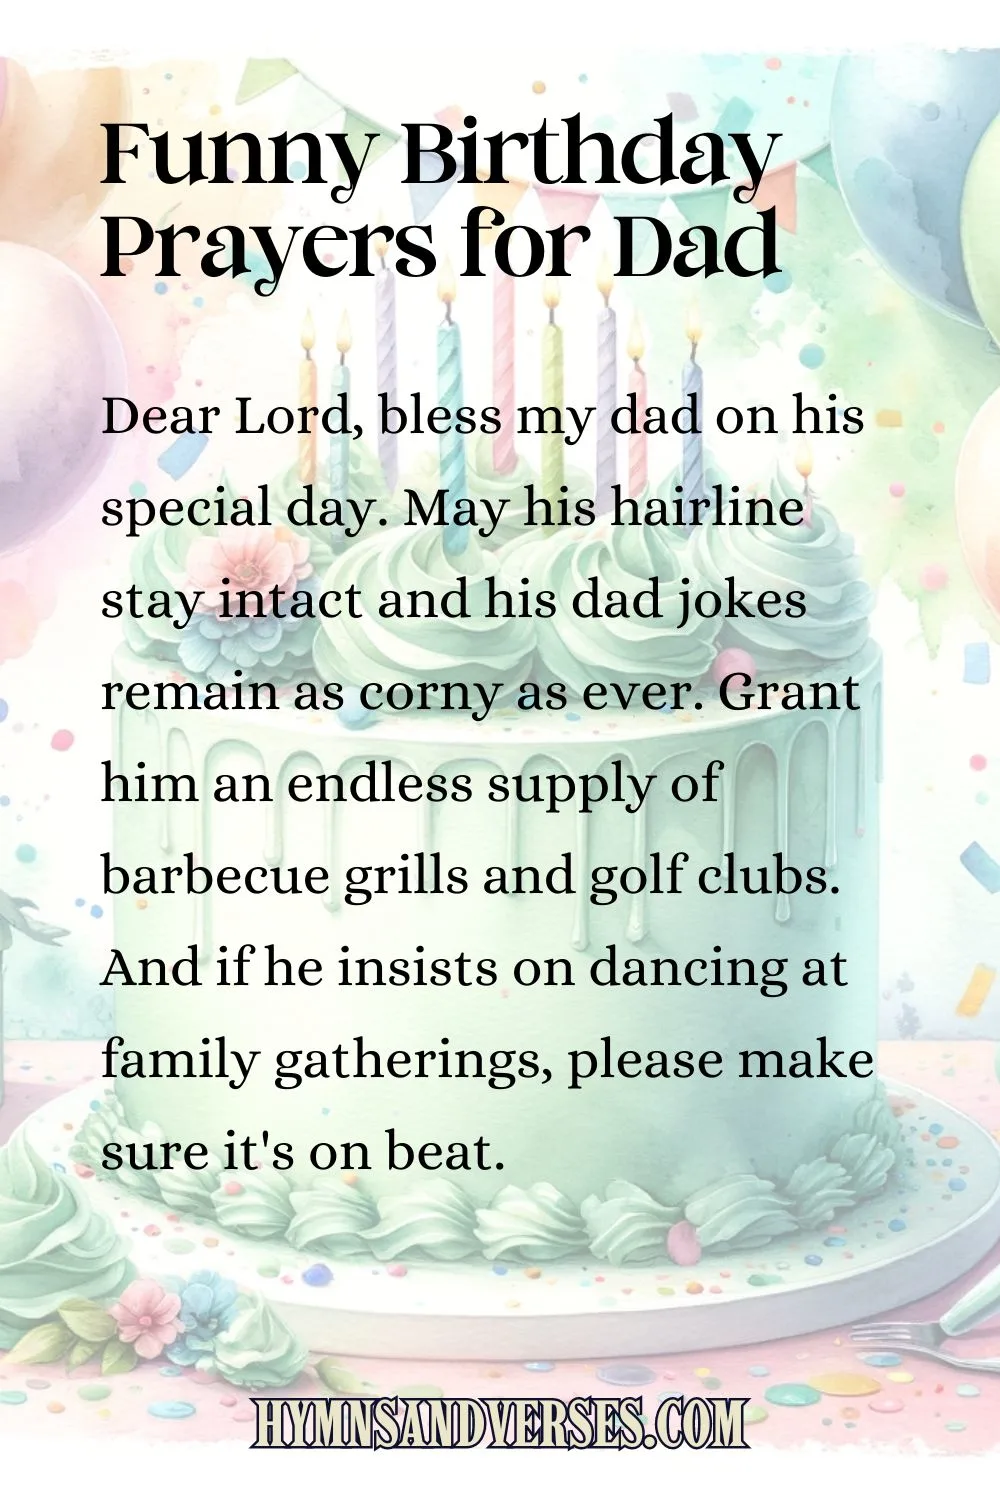 Birthday prayers for daddy, reads: Dear Lord, bless my dad on his special day. May his hairline stay intact and his dad jokes remain as corny as ever. Grant him an endless supply of barbecue grills and golf clubs. And if he insists on dancing at family gatherings, please make sure it's on beat.
